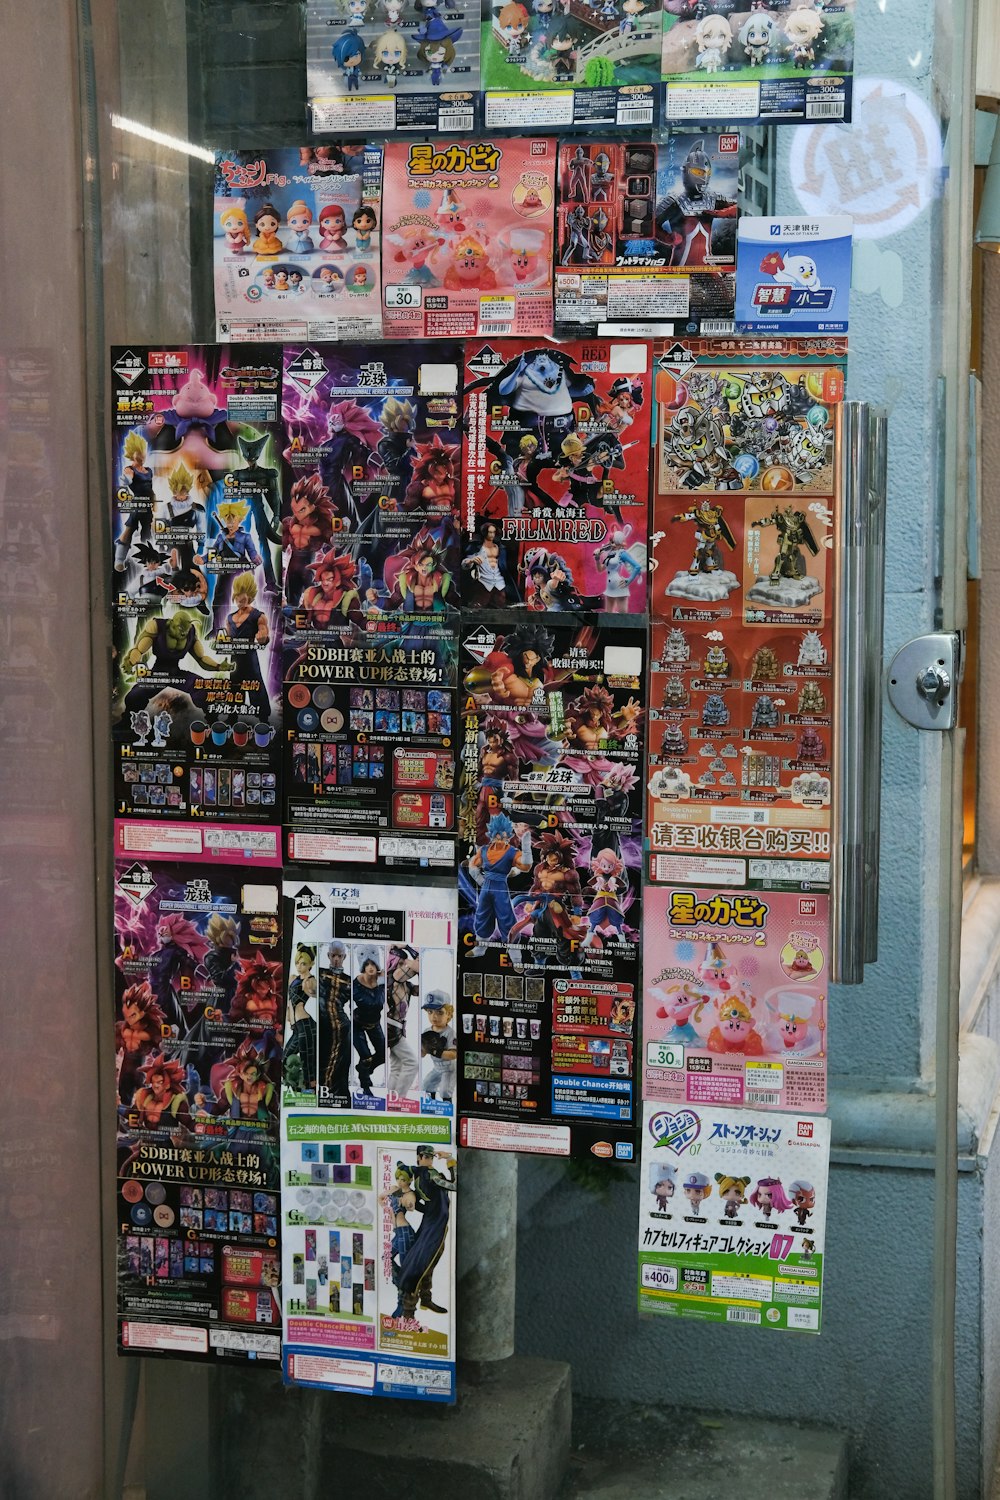 a bunch of posters are hanging on a wall